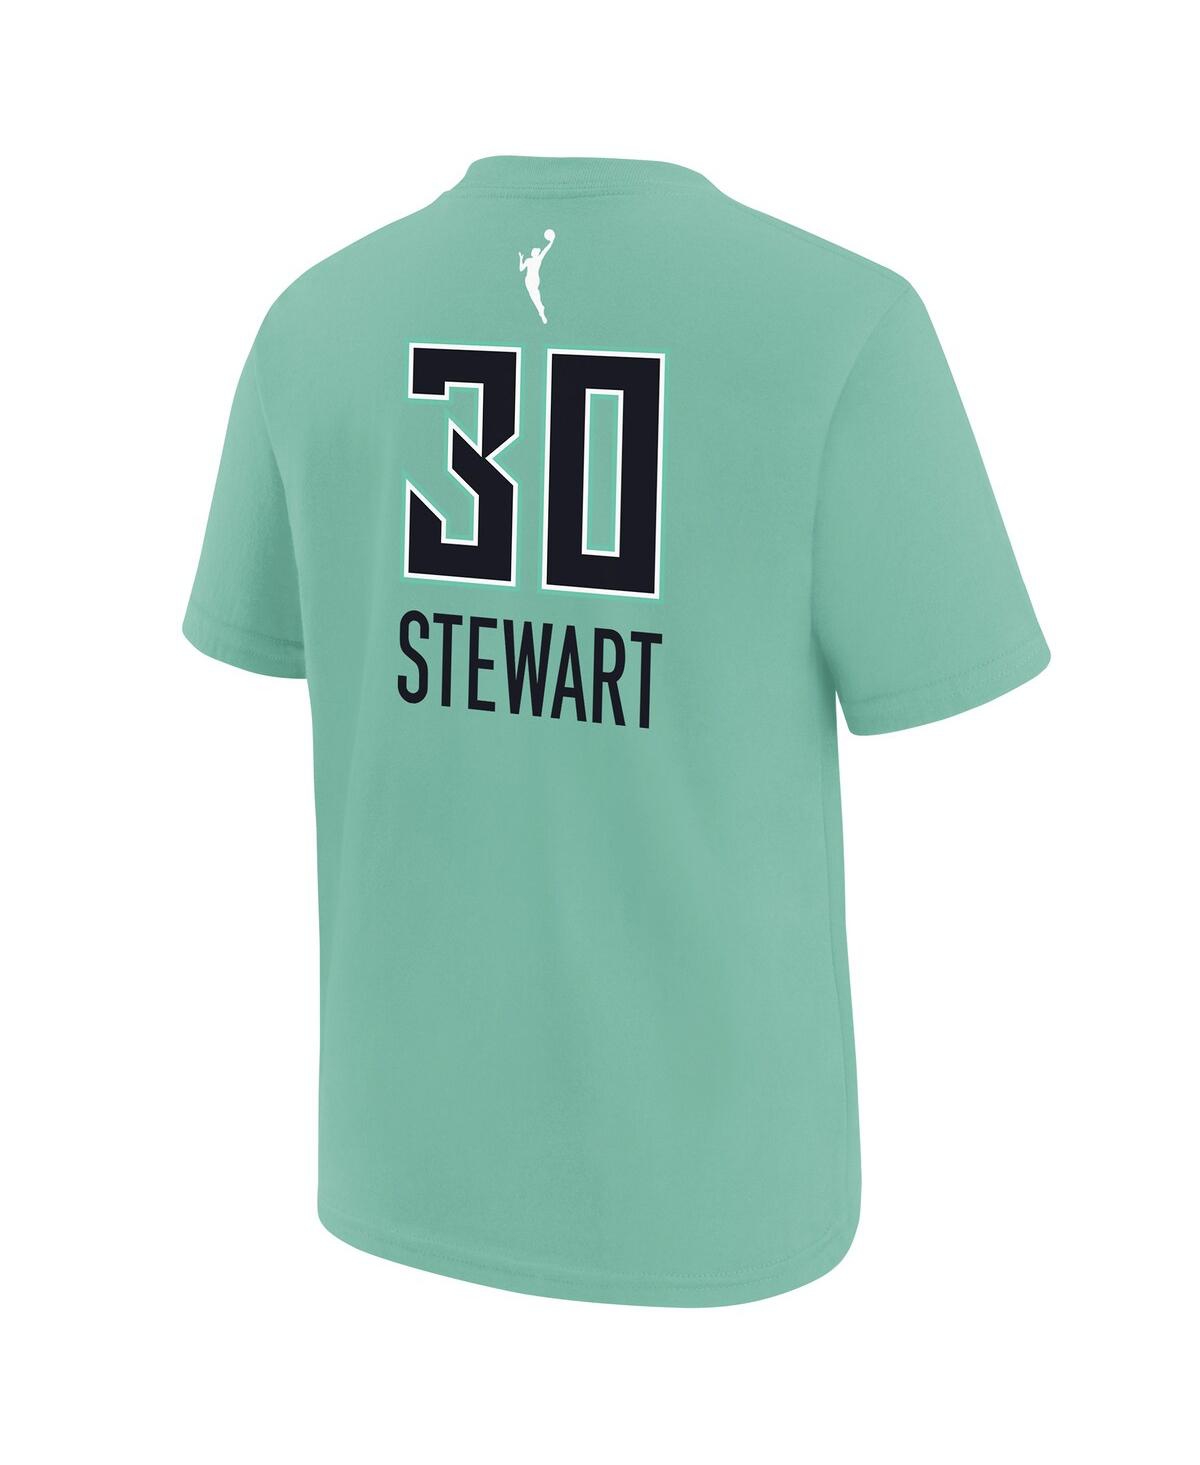 Shop Outerstuff Big Boys And Girls Breanna Stewart Mint New York Liberty Rebel Edition Name And Number T-shirt